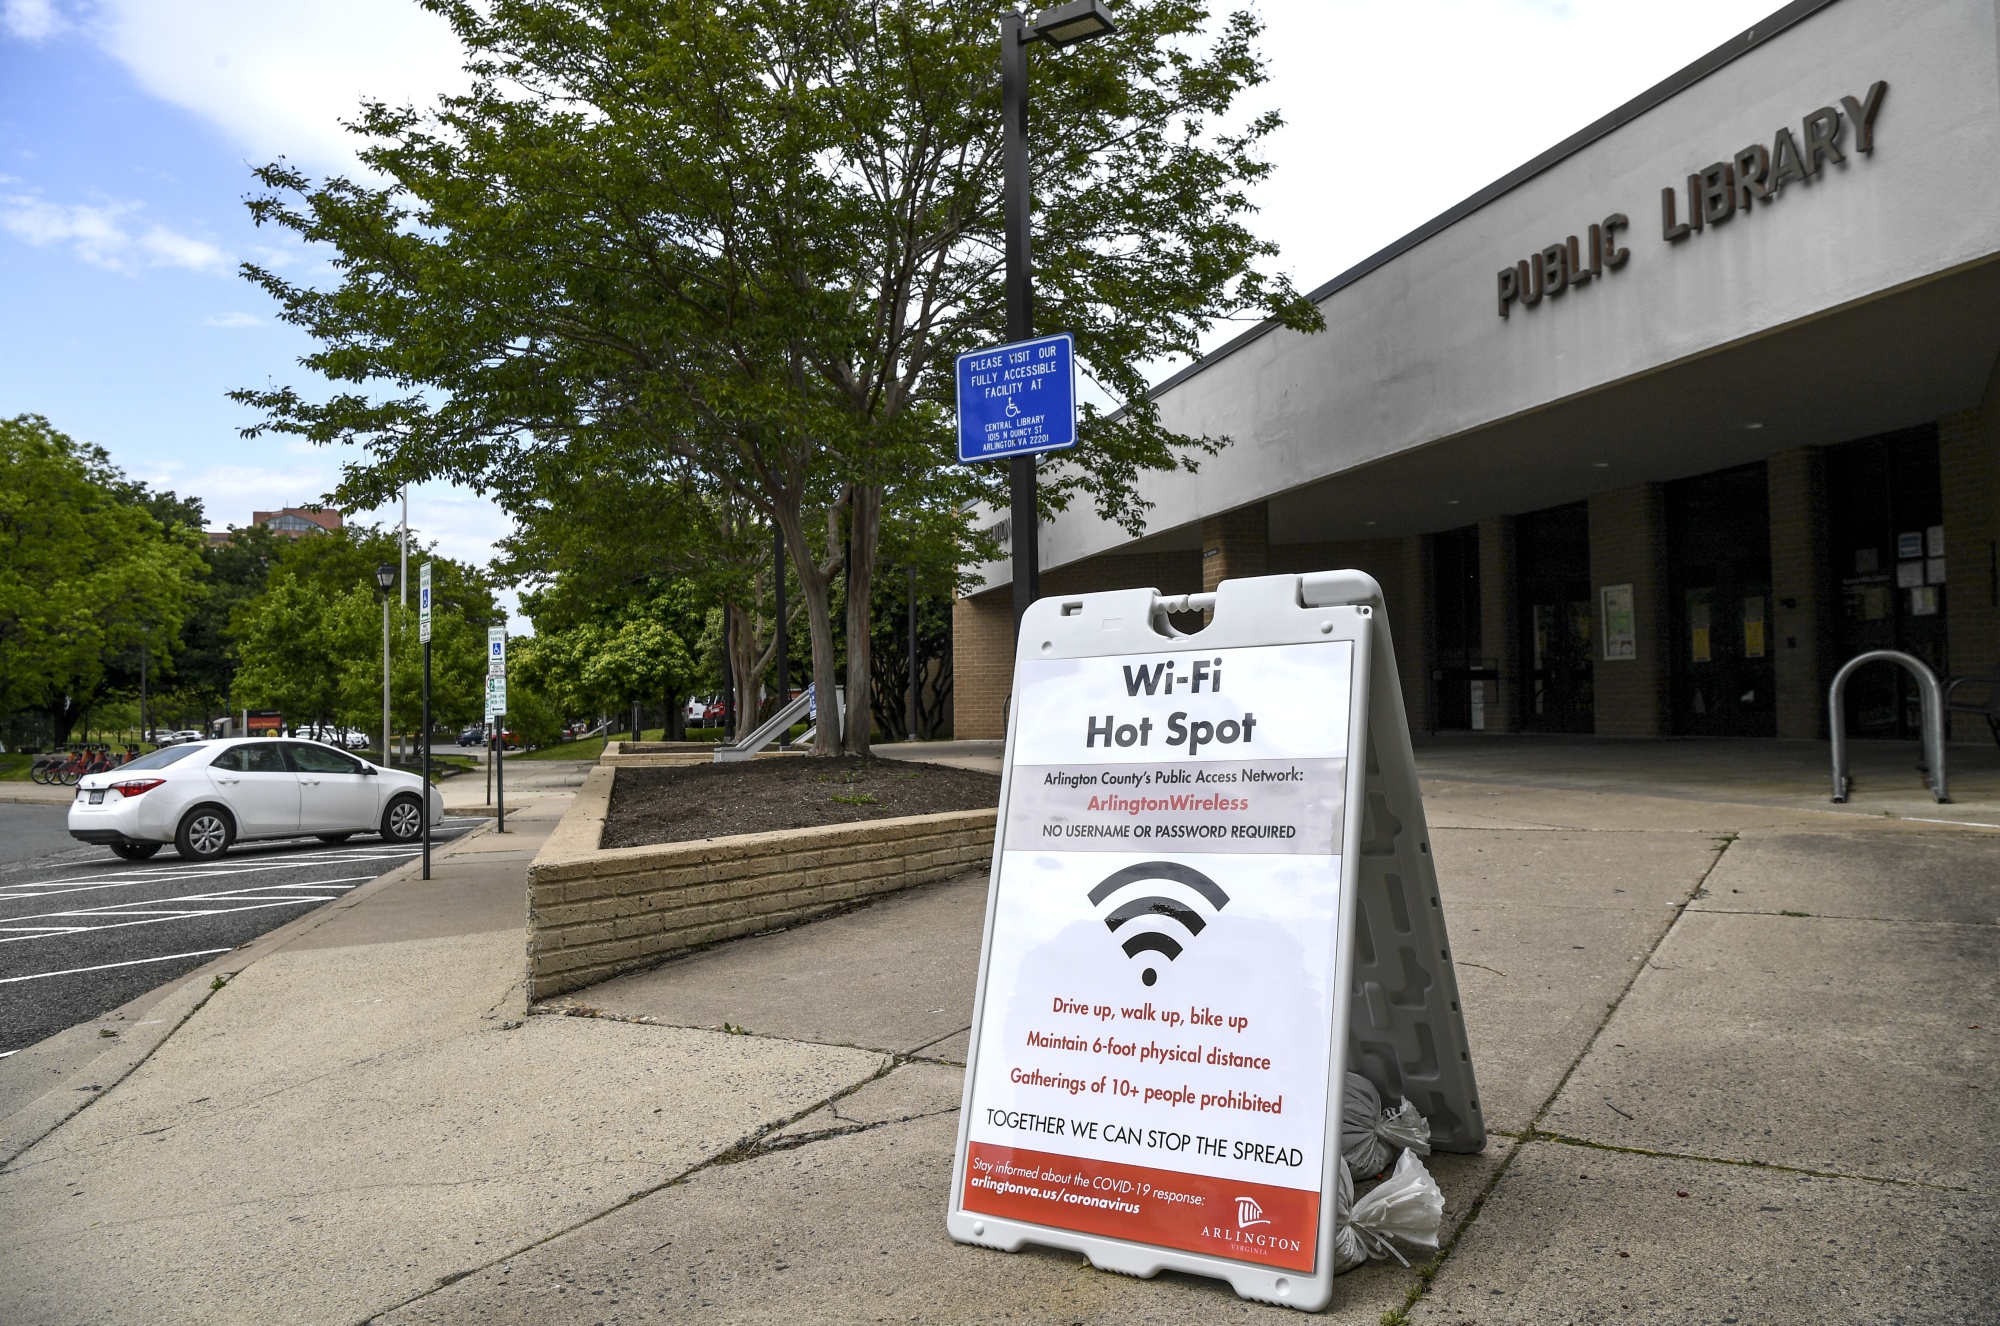 During the pandemic, the Aurora Hills Branch Library in Virginia was one of many to set up free internet hotspots for its residents. Now libraries are thinking about ways to continue expanding digital access outside the four walls of their buildings.&nbsp;